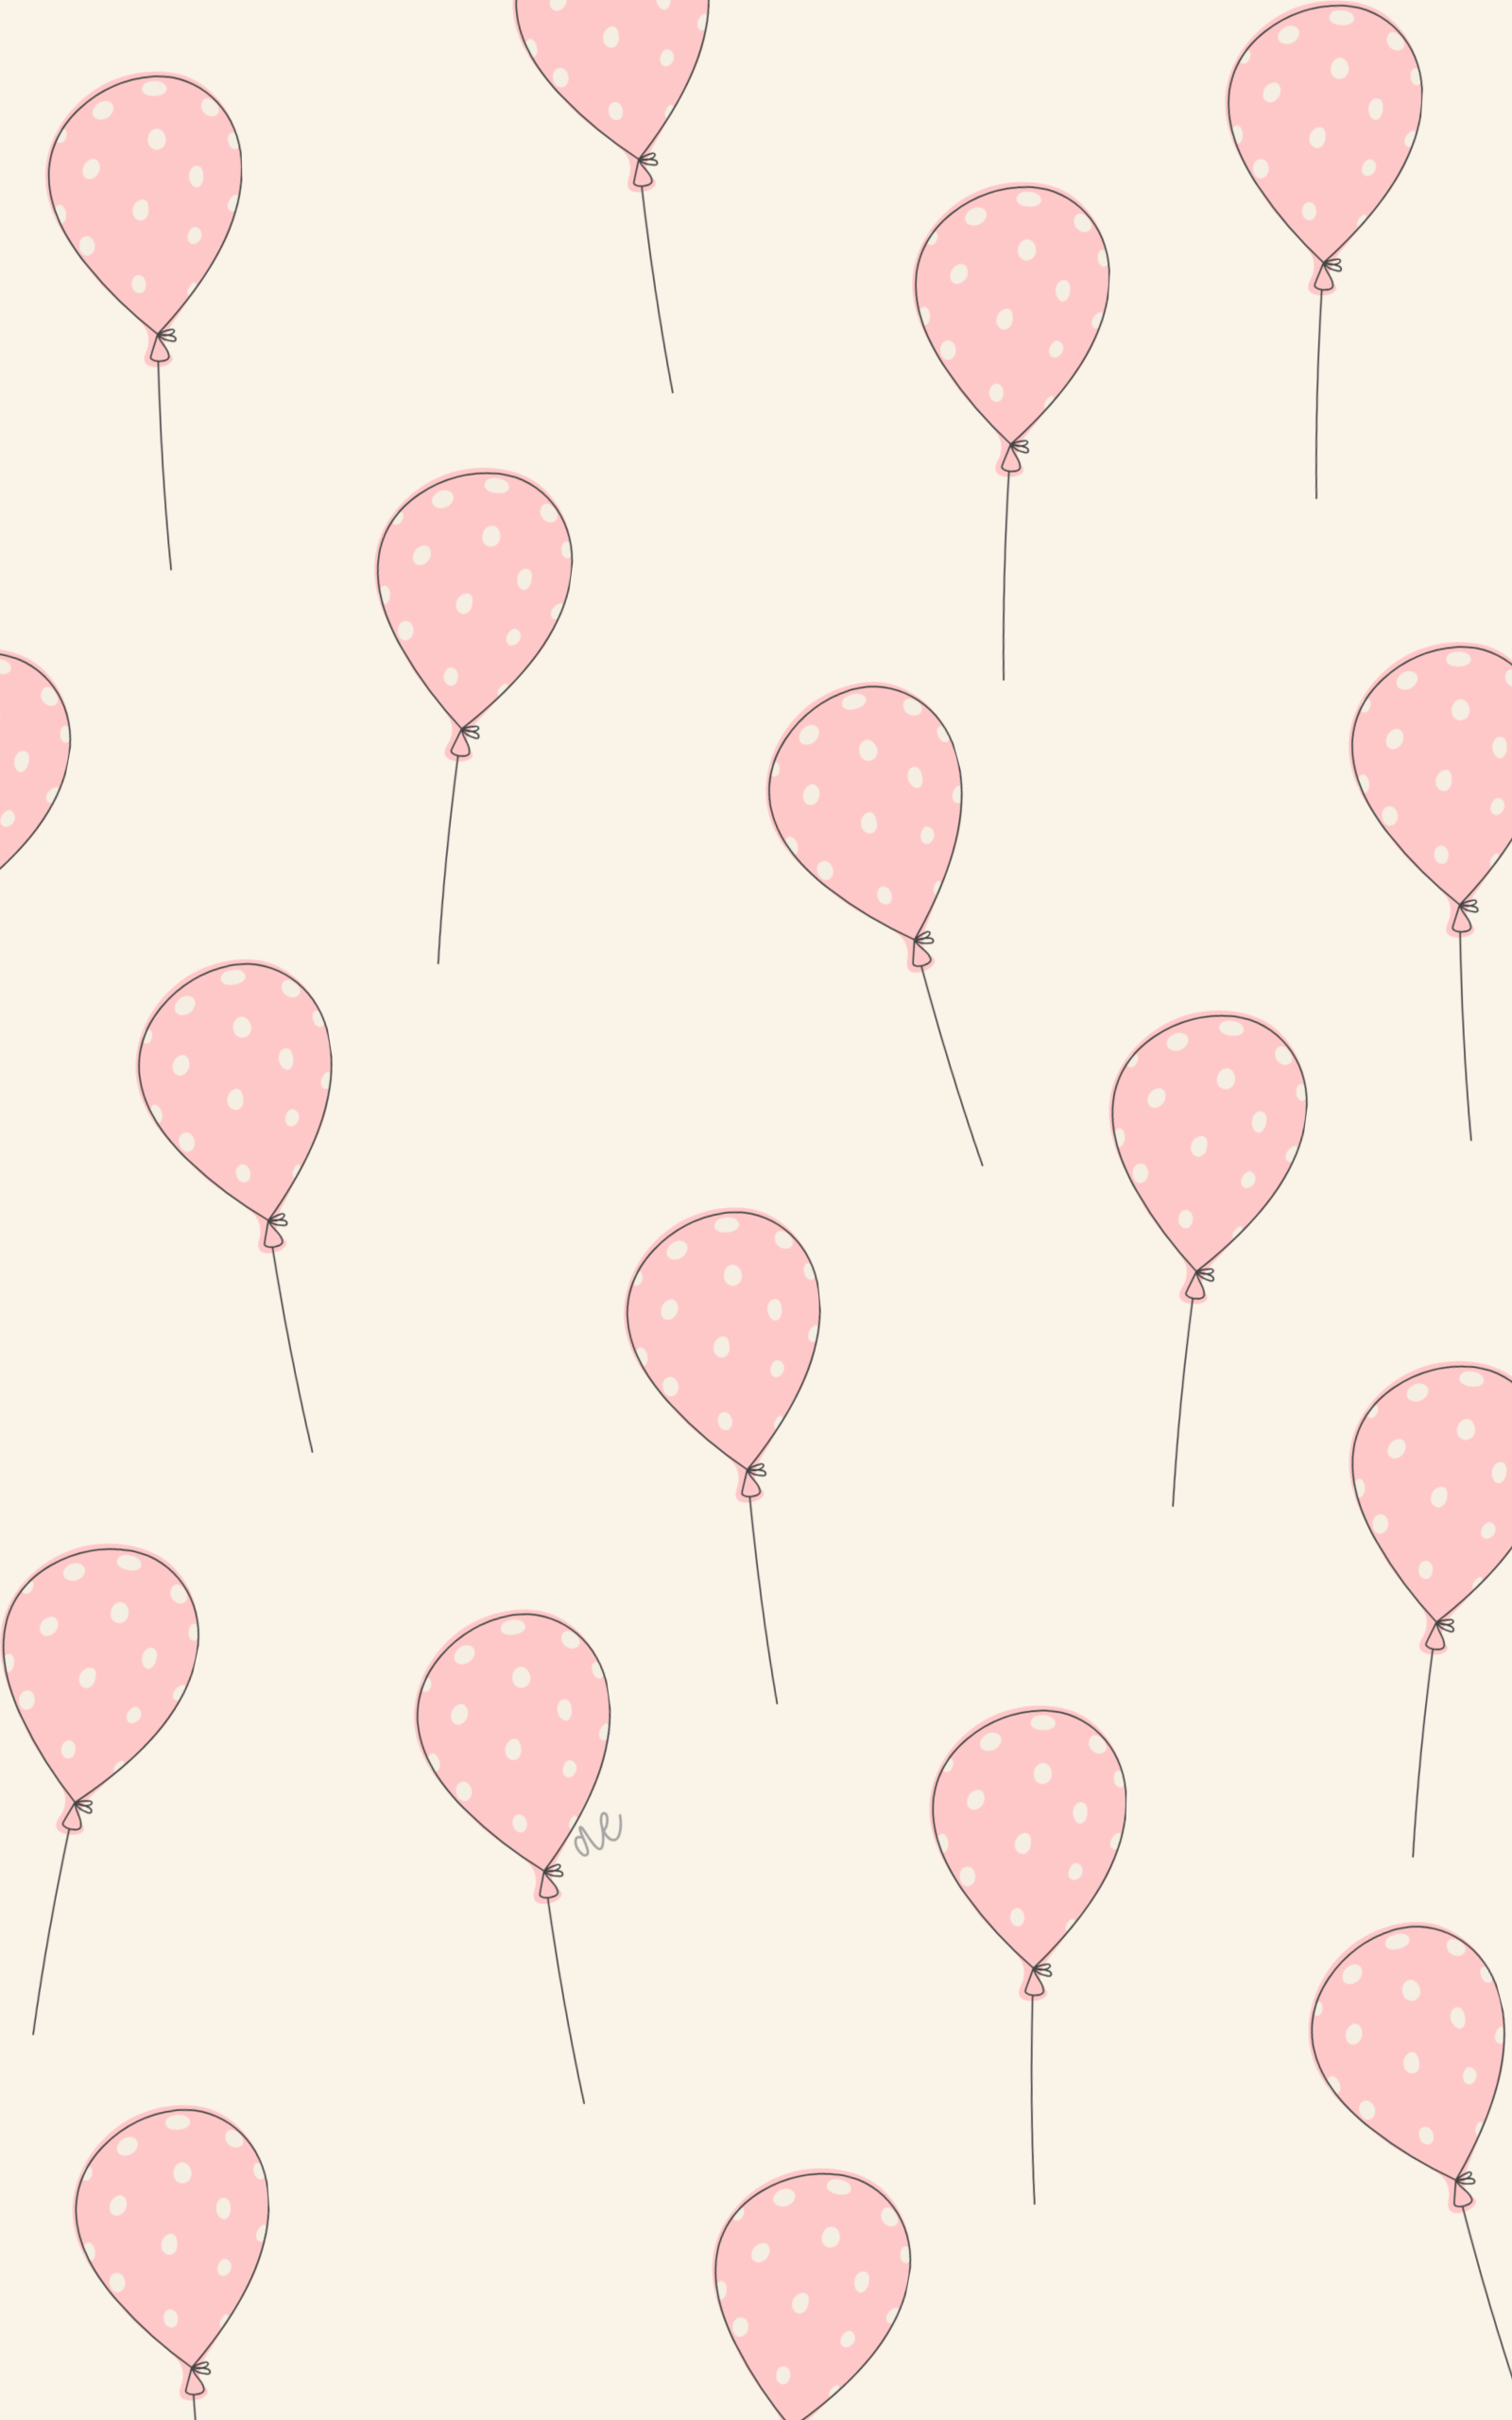 Birthday Wallpaper. Birthday wallpaper, Birthday background image, Floral wallpaper iphone